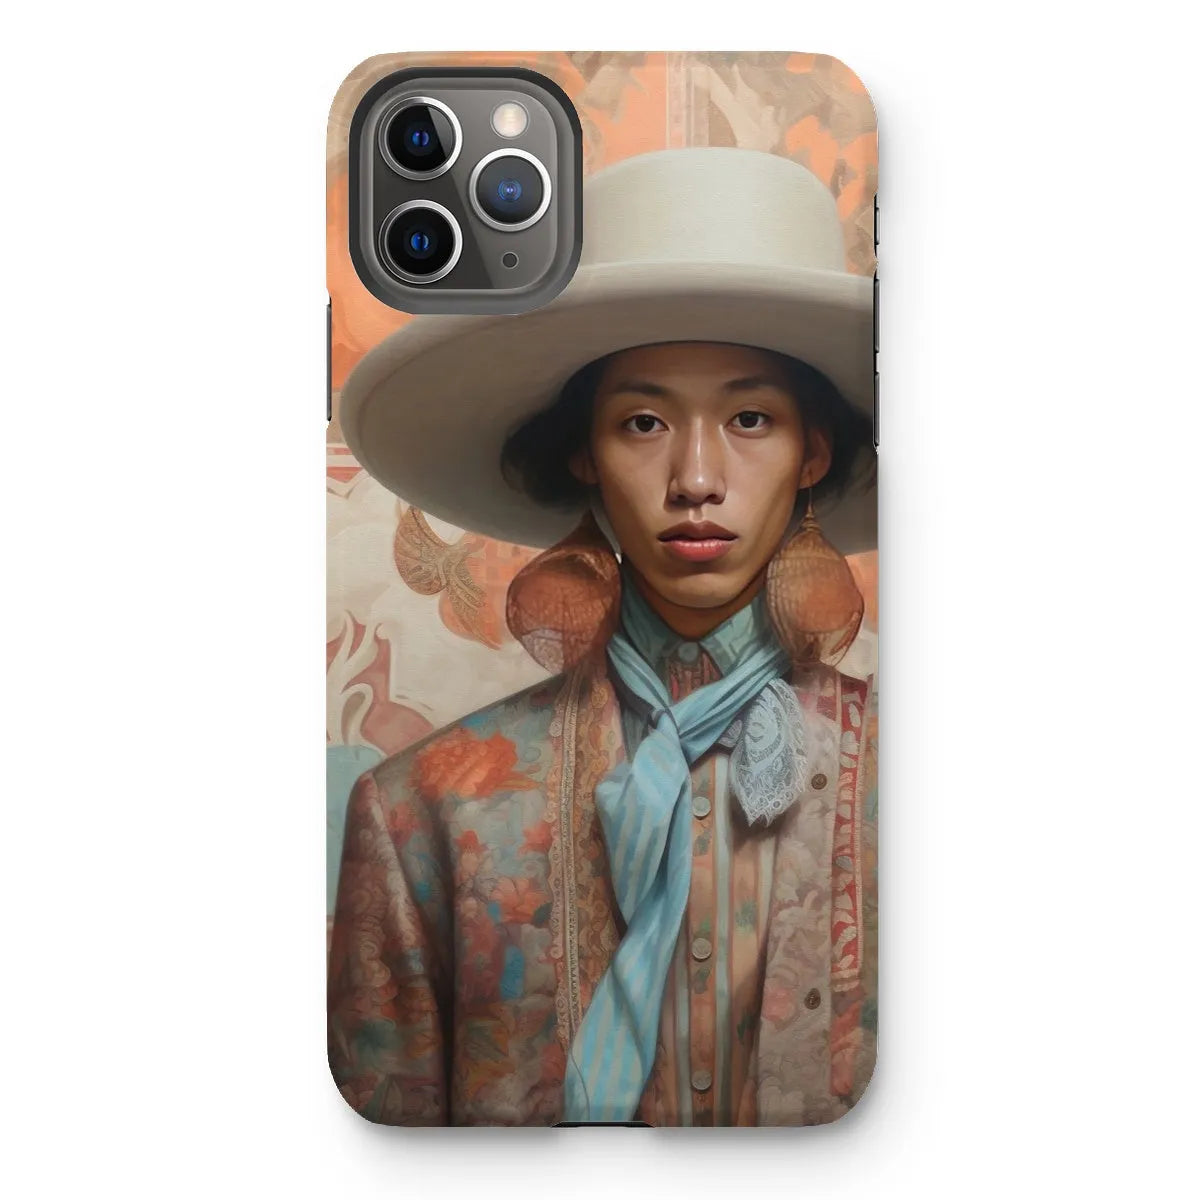 Iyaan - Gay Malay Asian Cowboy Aesthetic Art Phone Case - Iphone 11 Pro Max / Matte - Mobile Phone Cases - Aesthetic Art